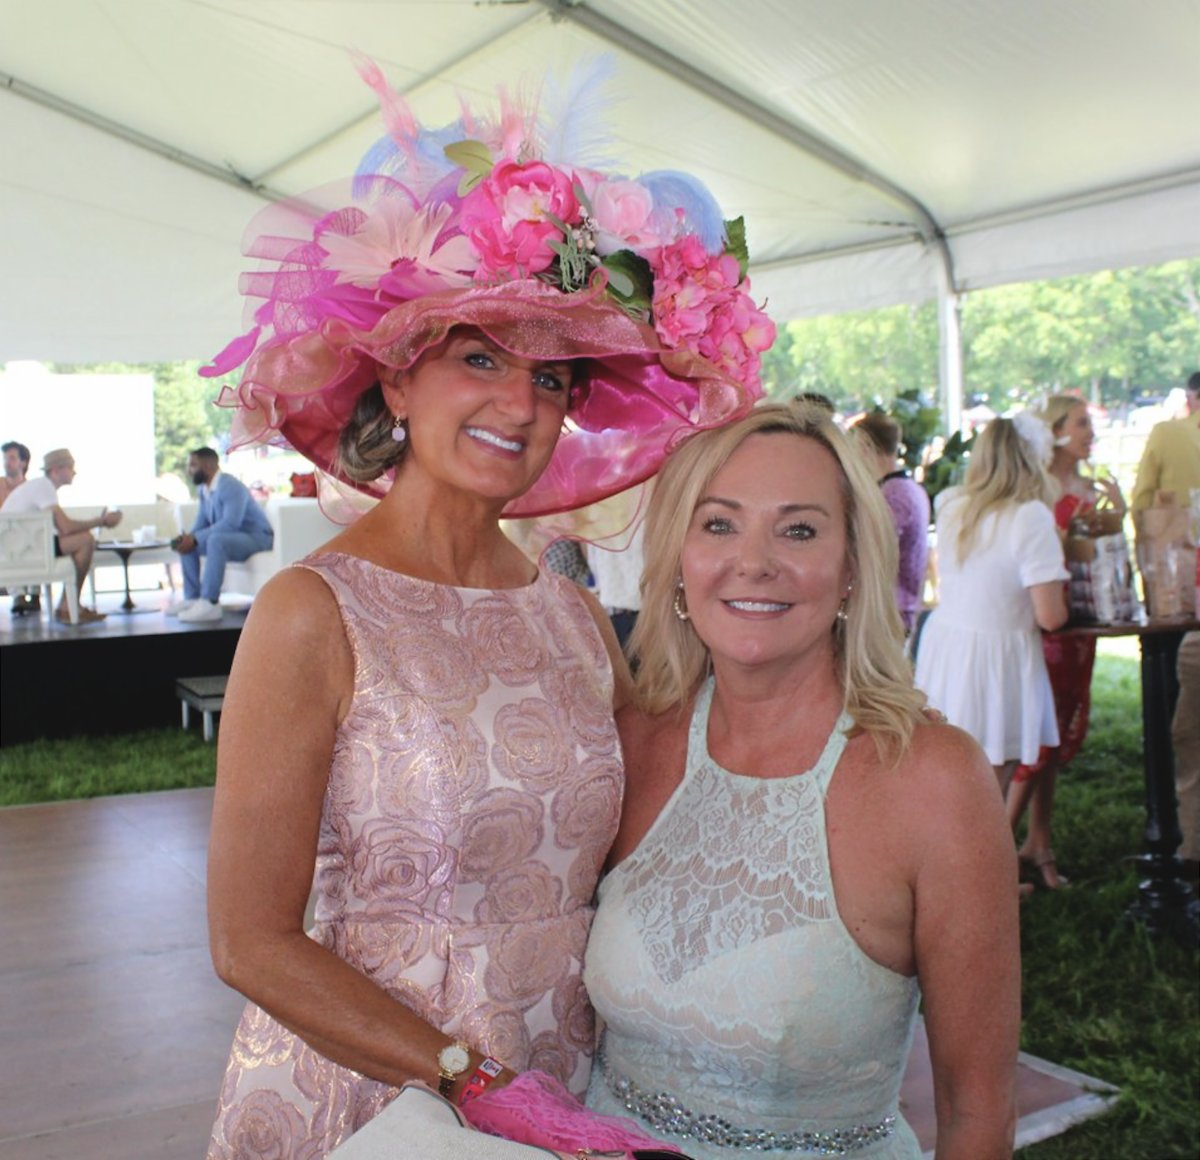 The Royal 615 Lounge is Iroquois Steeplechase’s hottest ticket. Enjoy a Bubble Bar, DJ tunes, food trucks, premium restrooms, and a front-row seat to the races. nashvillelifestyles.com/living/communi…